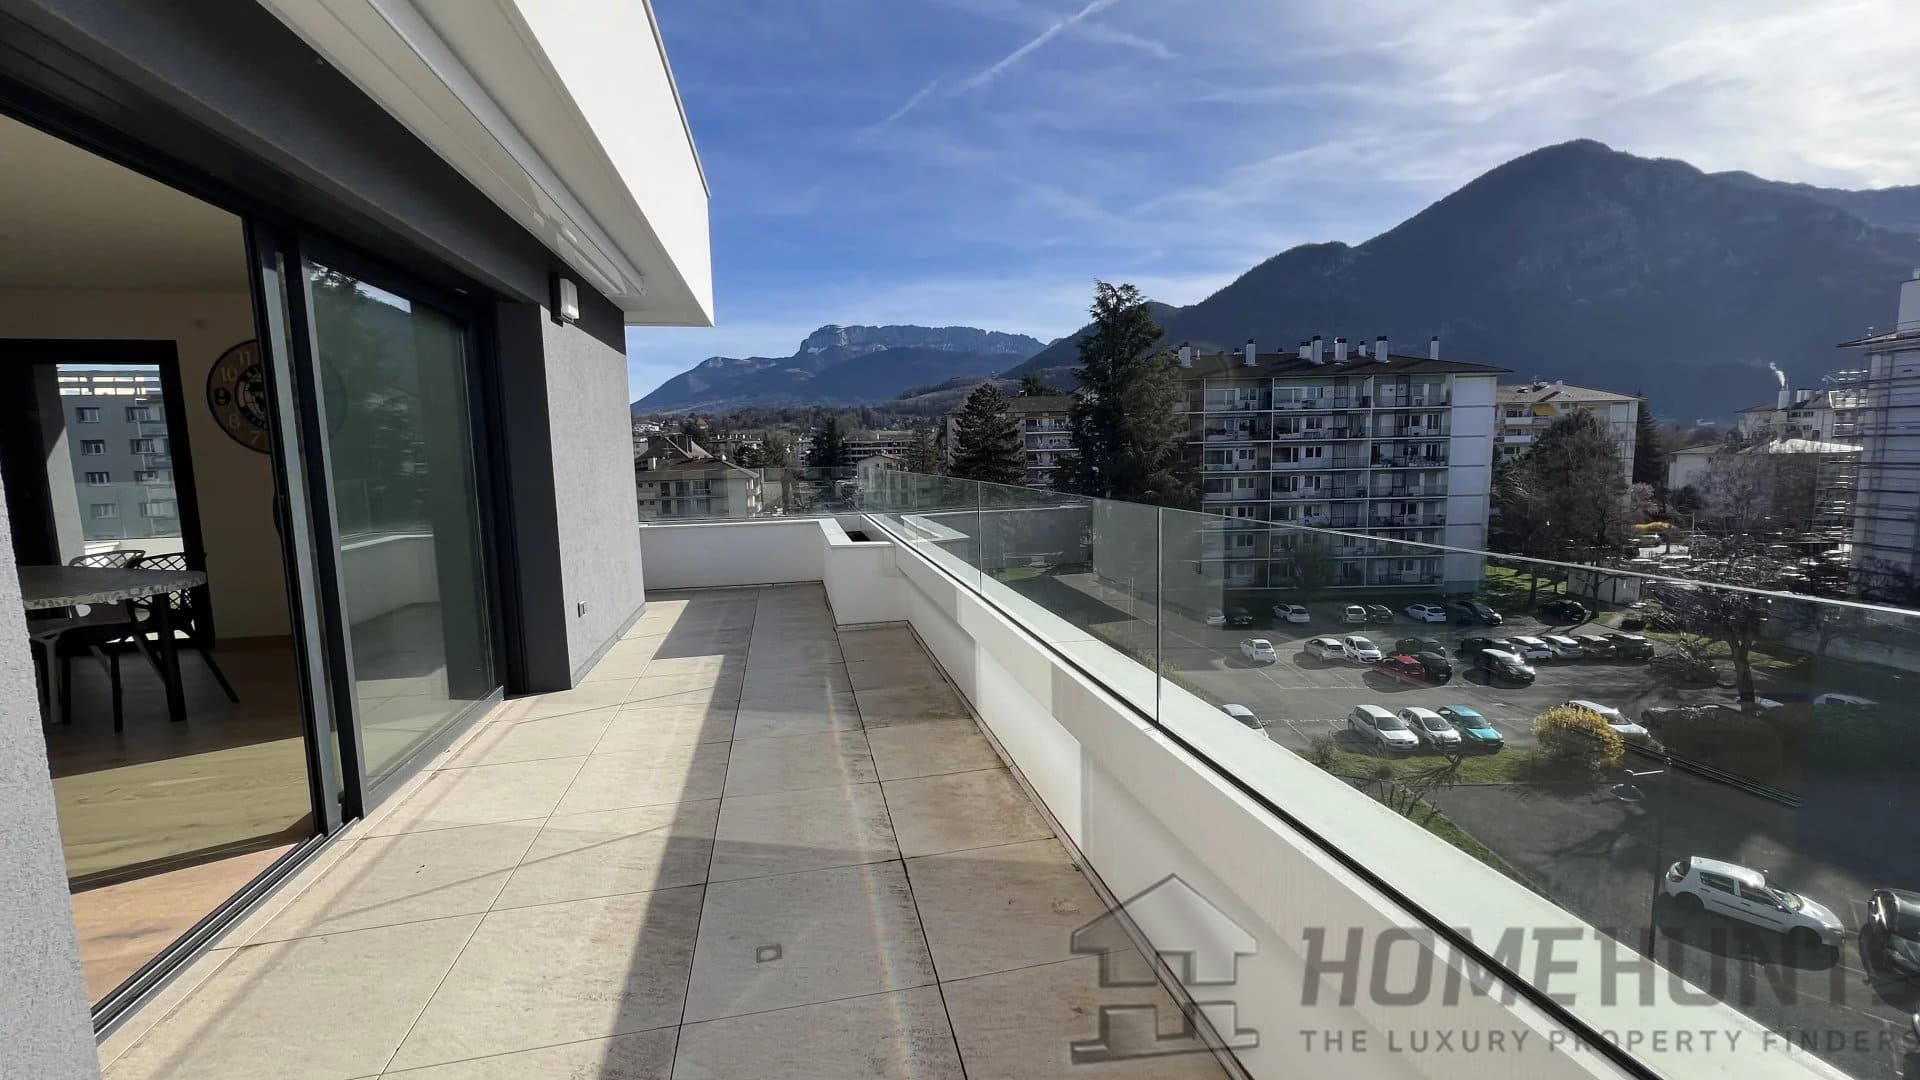 3 Bedroom Apartment in Annecy Le Vieux 8